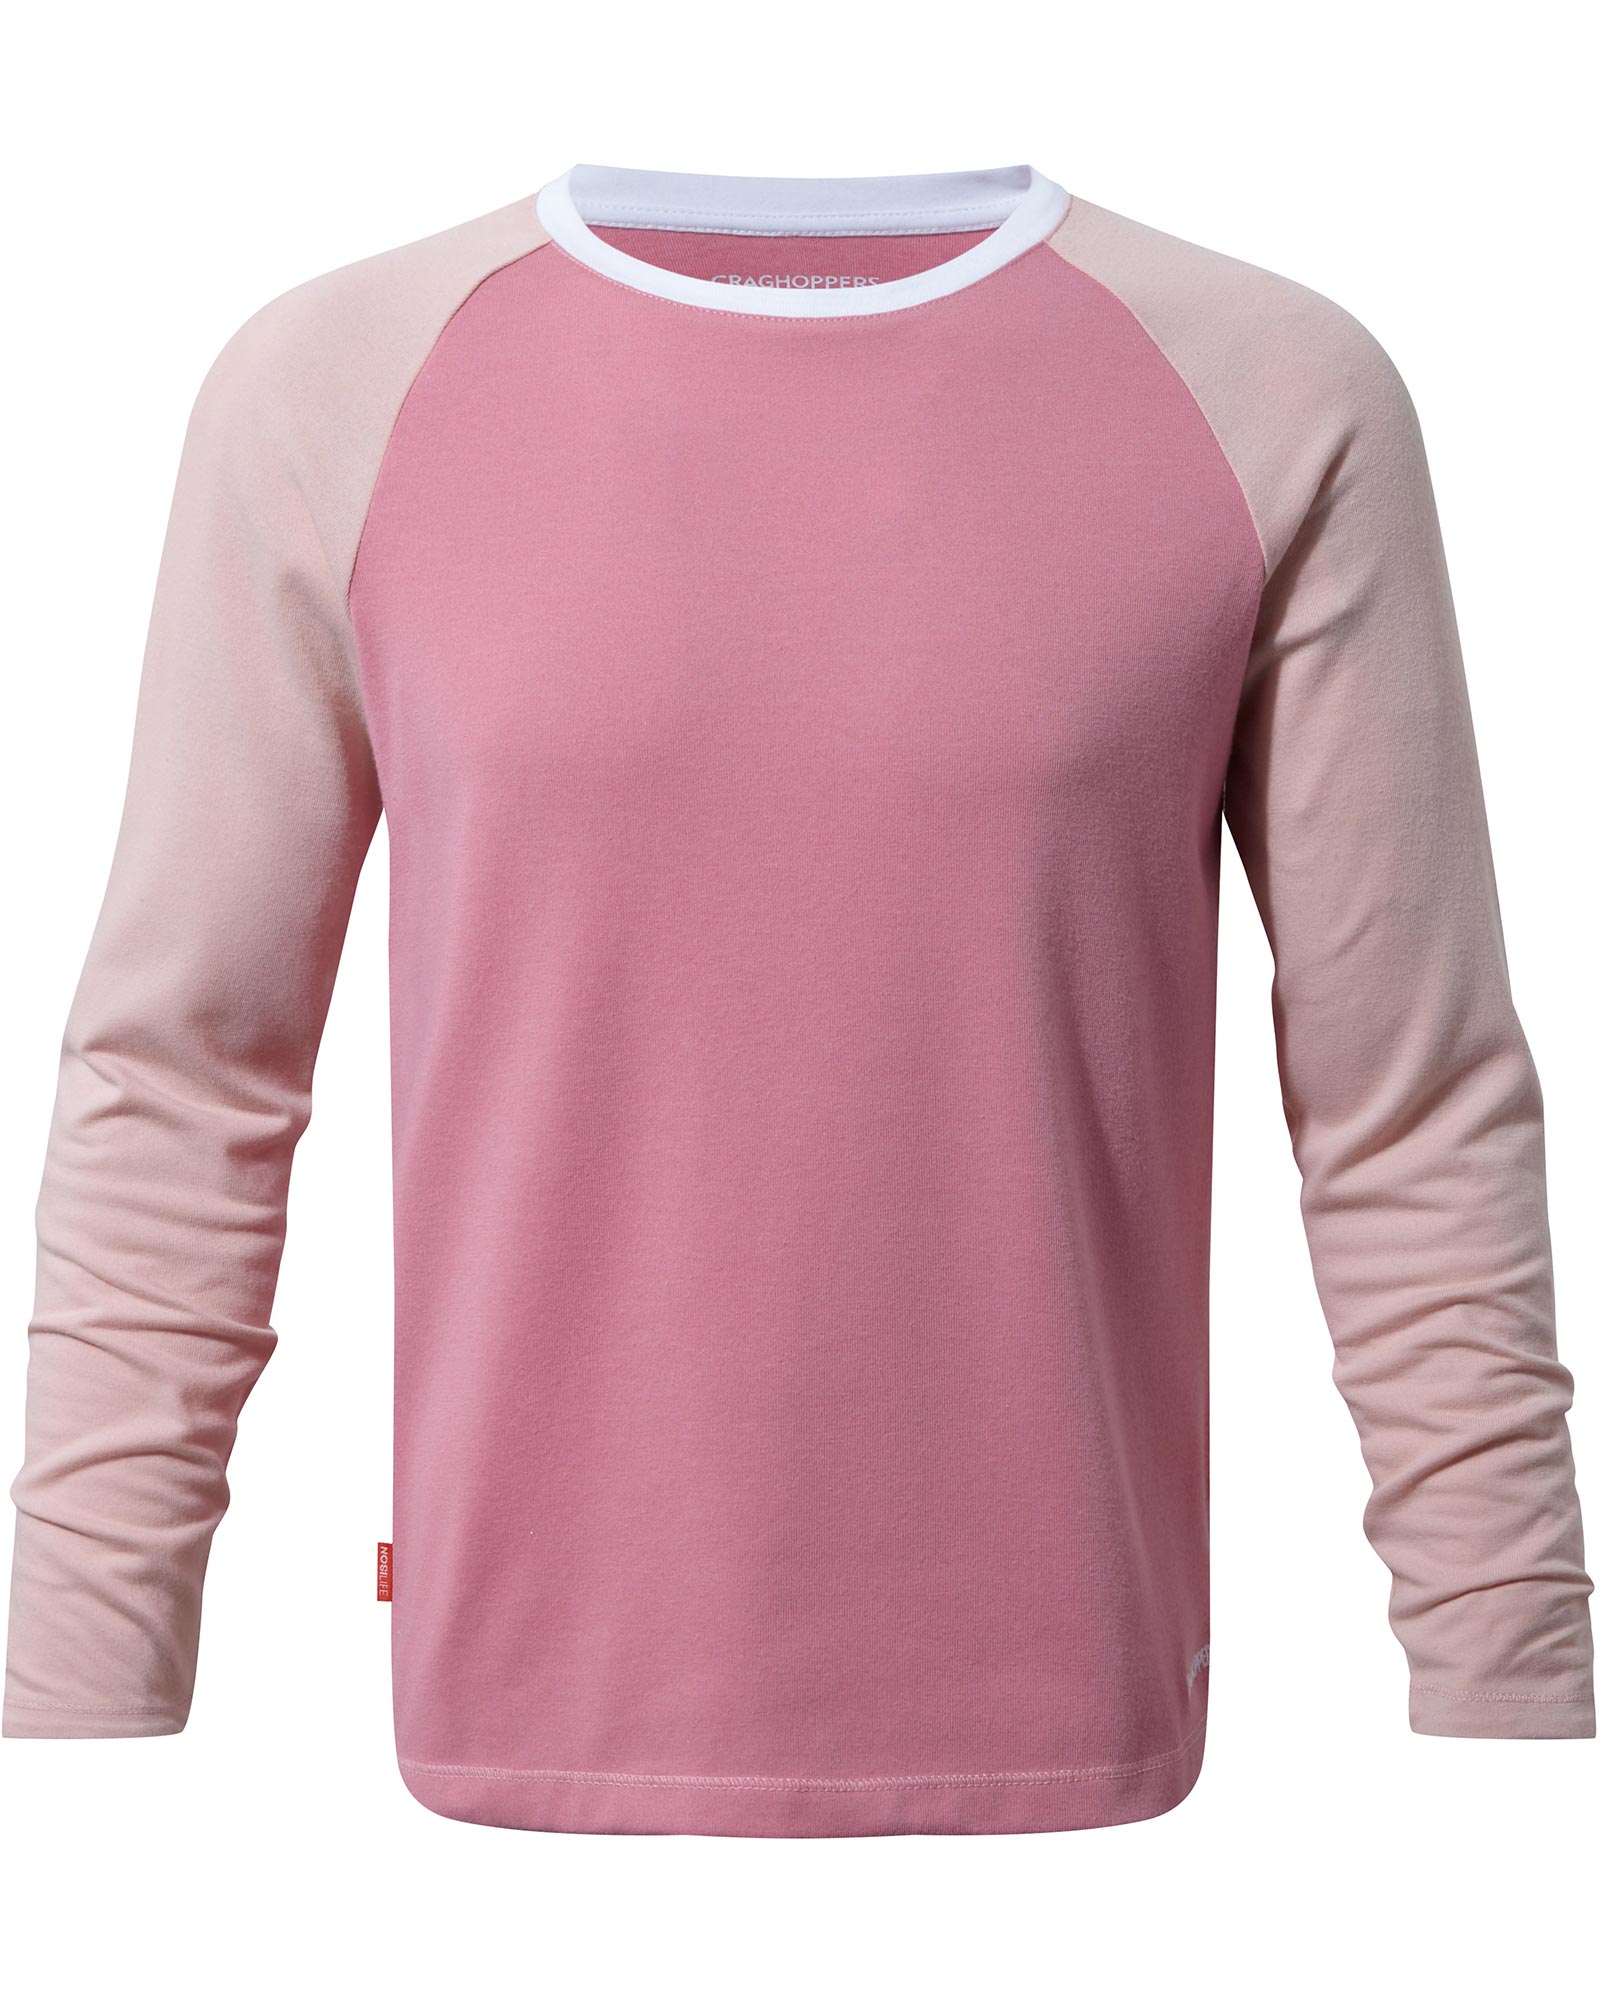 Craghoppers NosiLife Barnaby Kids’ Long Sleeve T Shirt - English Rose 9 Years